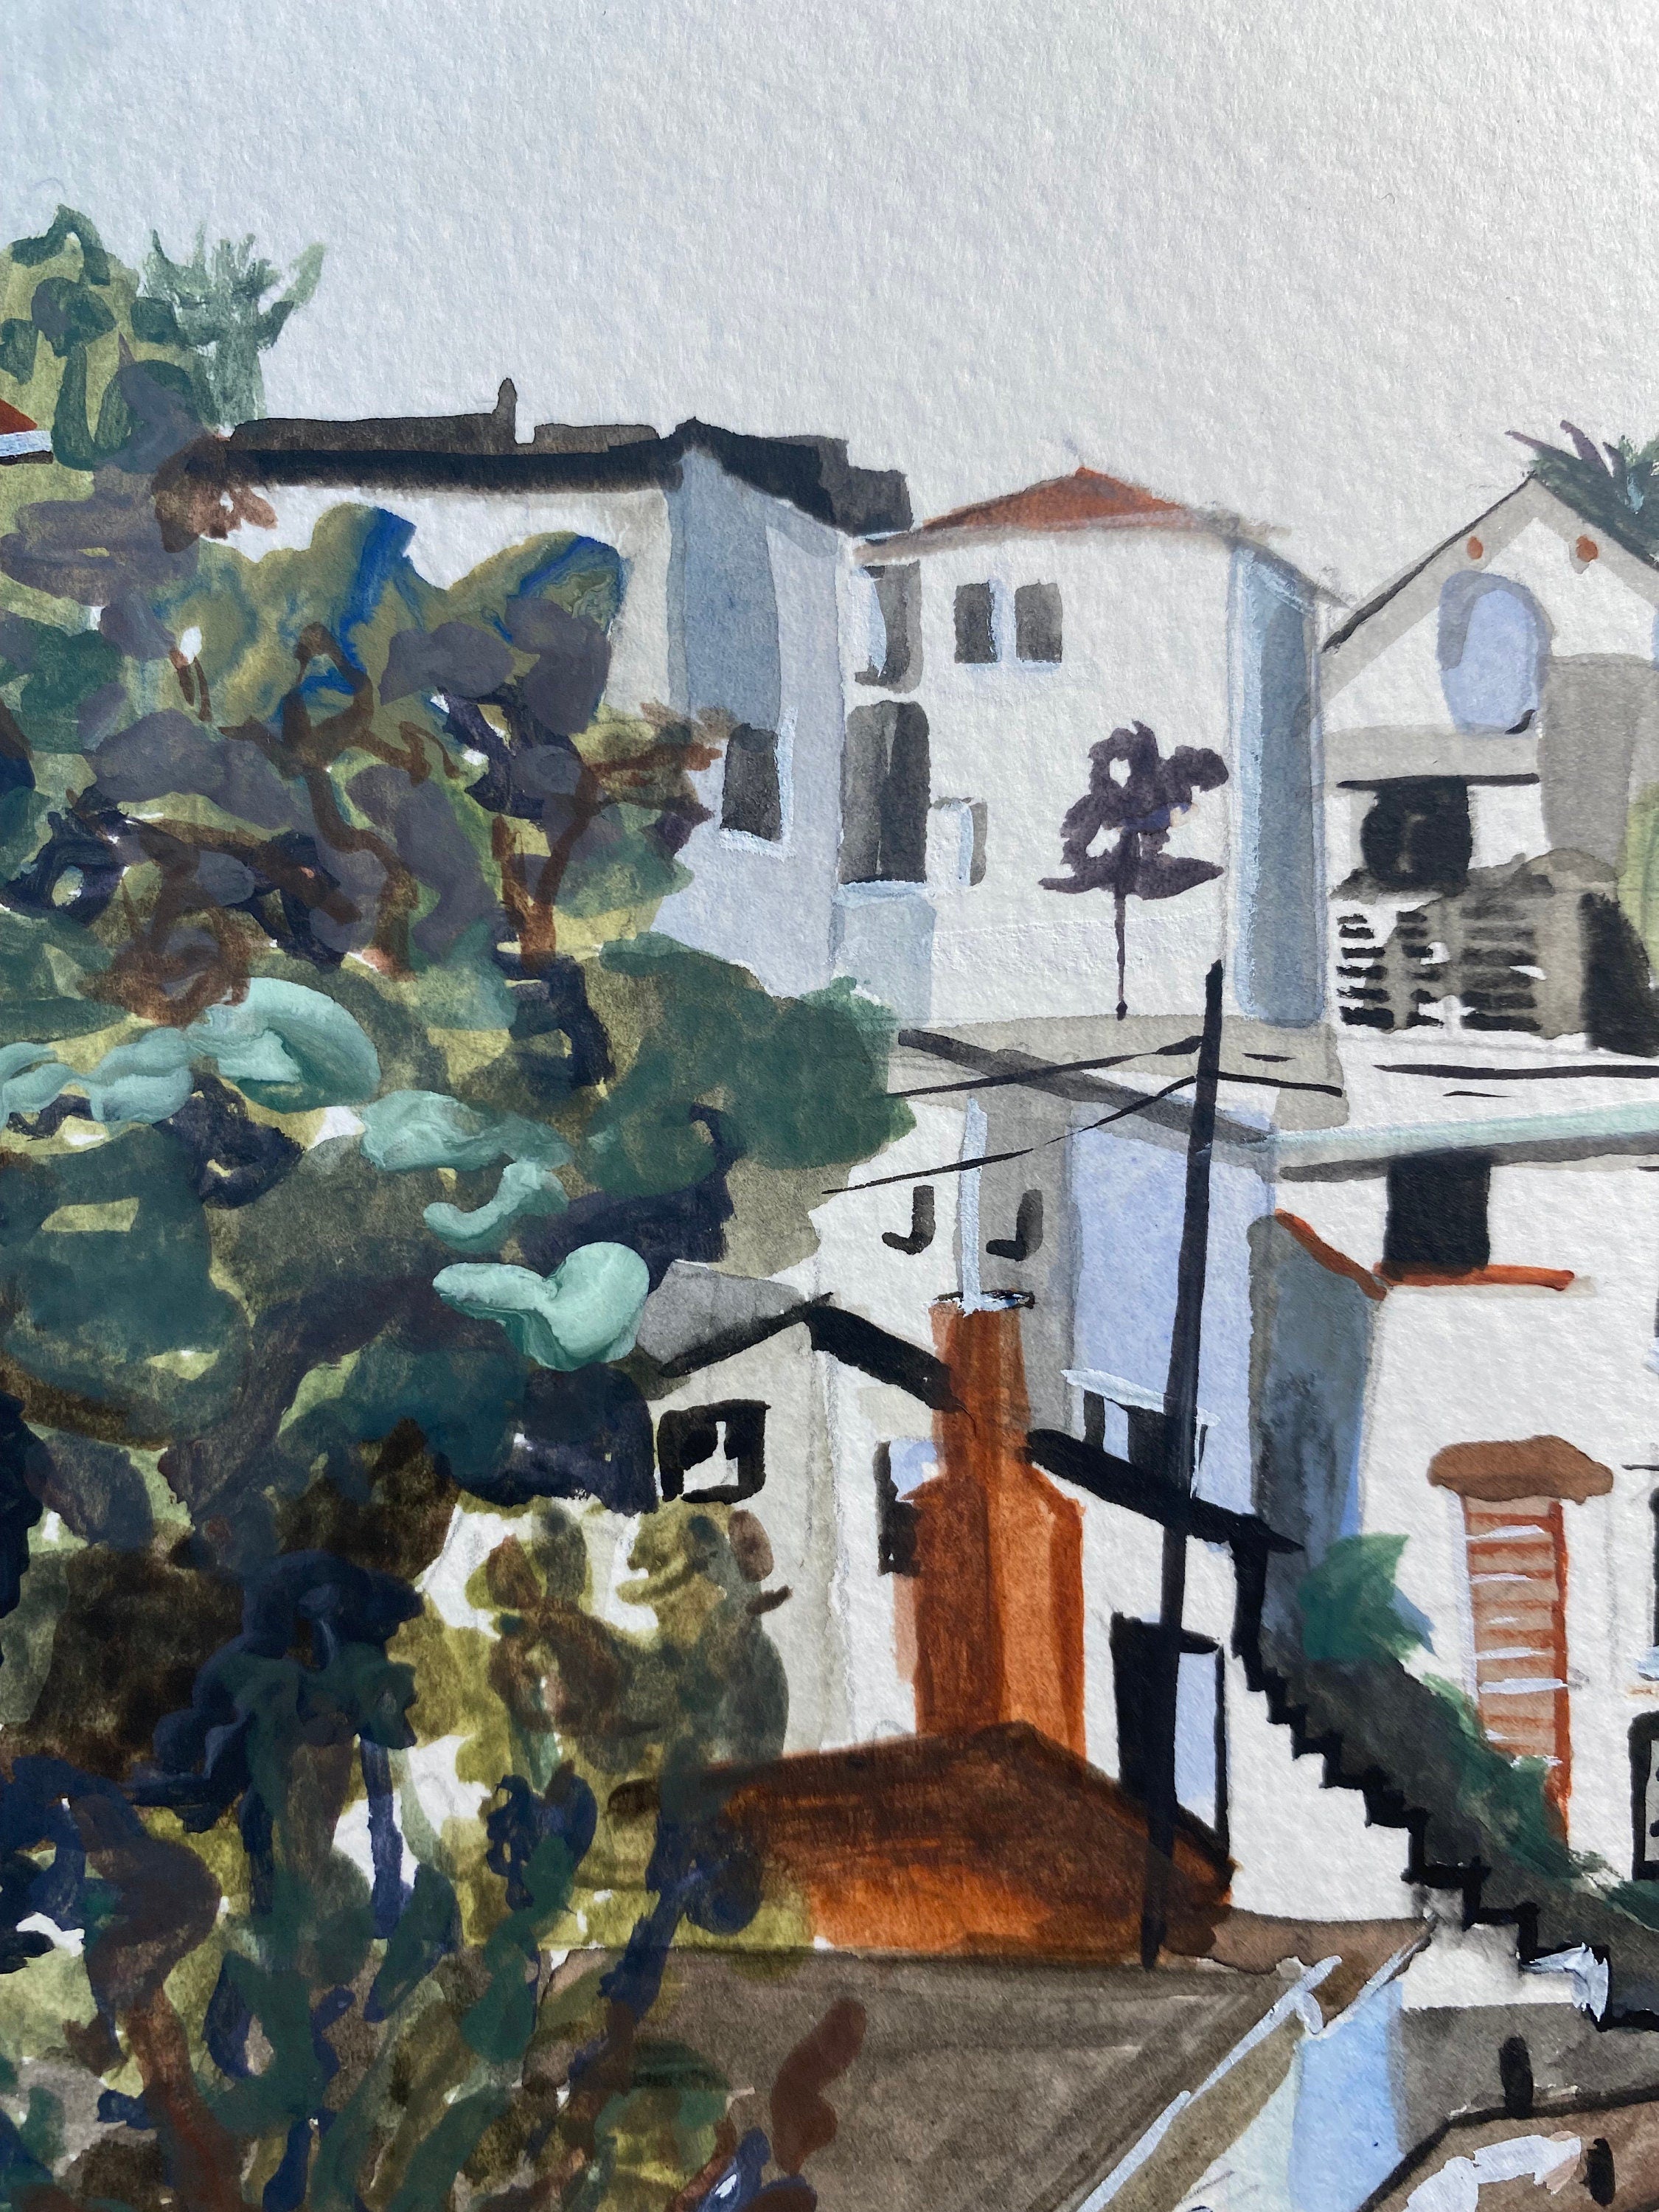 Silverlake, Los Angeles neighborhood print of painting by Medjool Studio. Print of an original gouache painting of a neighborhood in Silverlake, Los Angeles featuring white houses and greenery.  